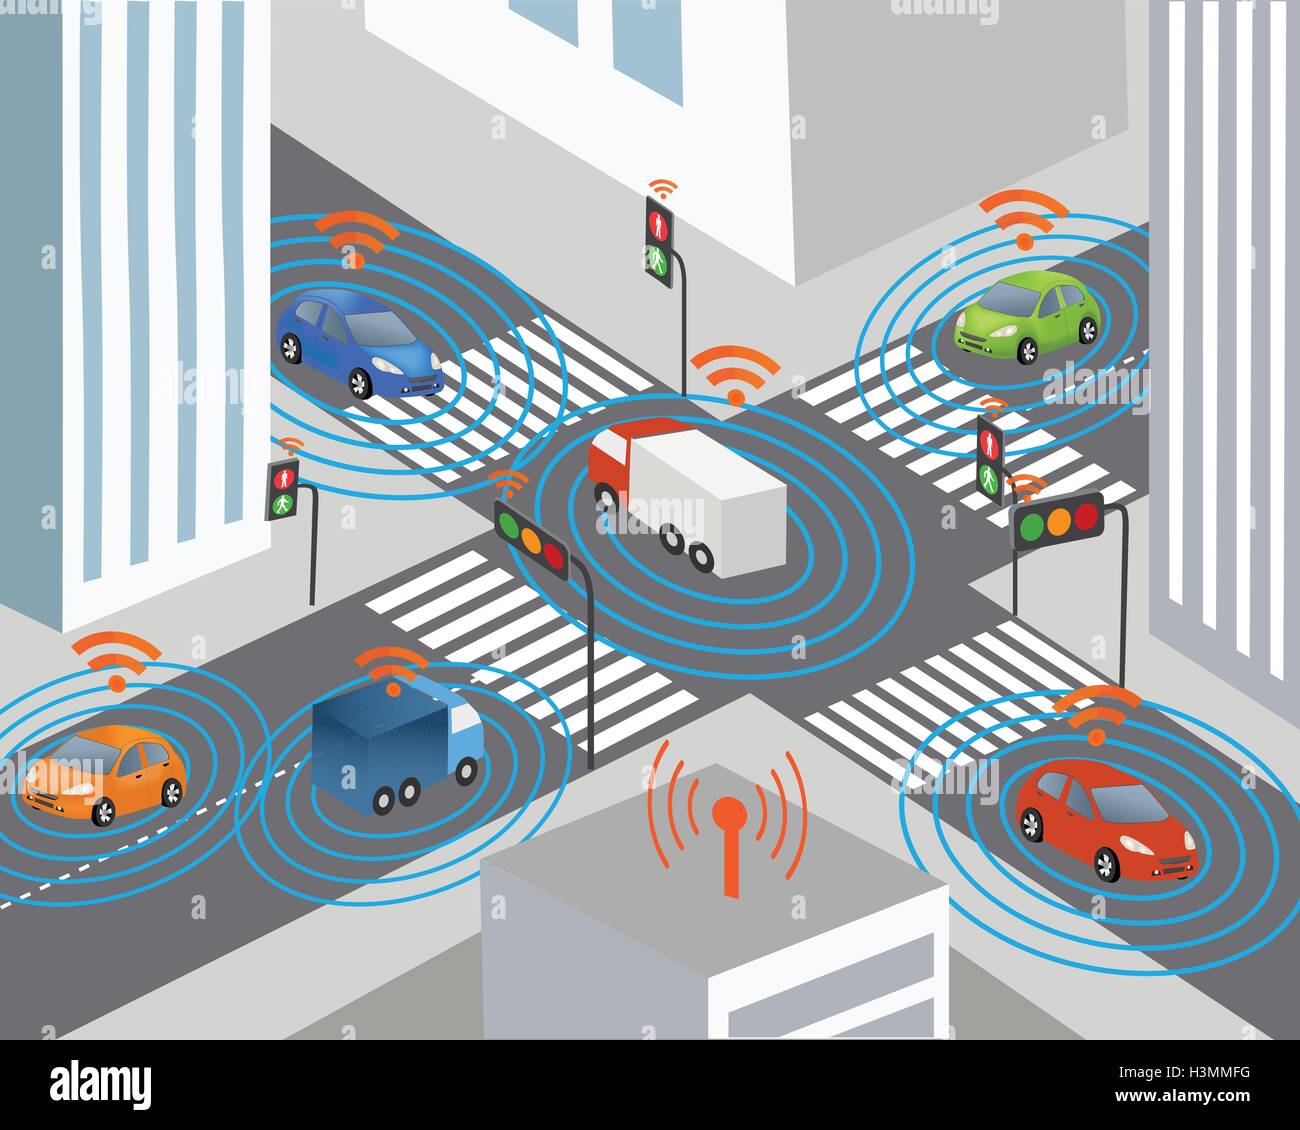 Communication that connects cars to devices on the road, such as traffic lights, sensors, or Internet gateways. Wireless network Stock Vector